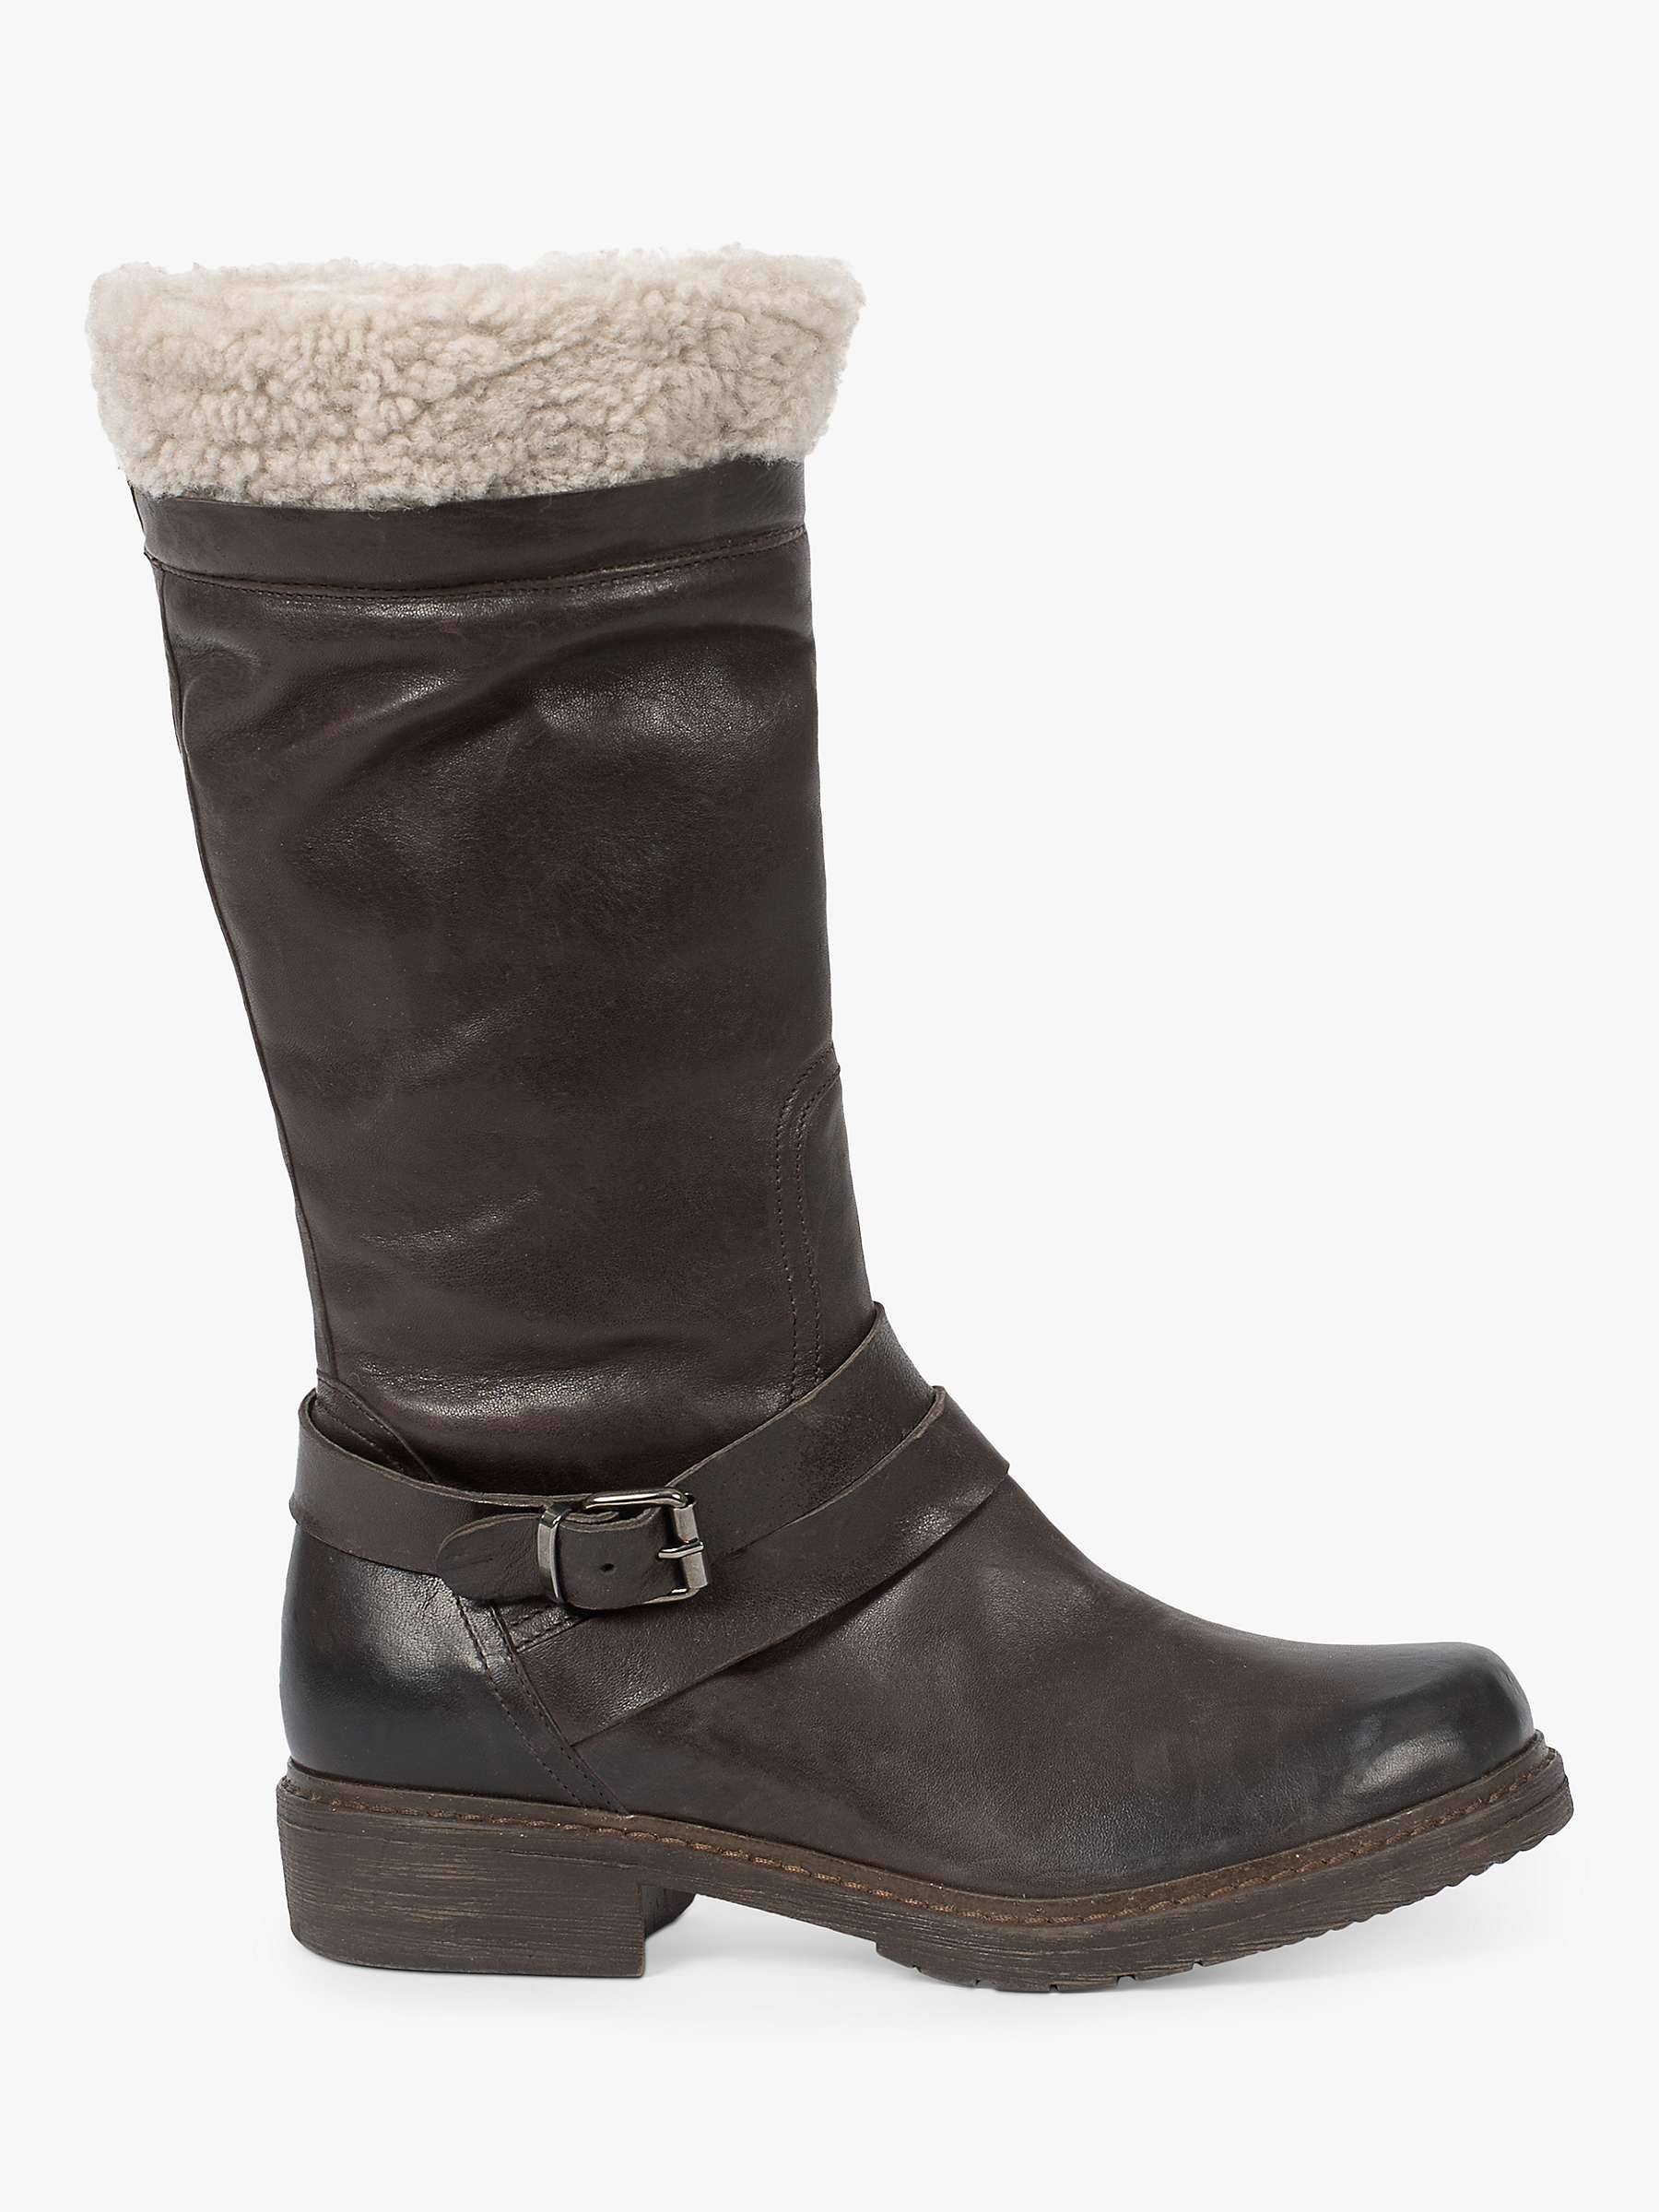 Buy Celtic & Co. Sheepskin Trim Cuff Long Boots, Tanners Brown Online at johnlewis.com